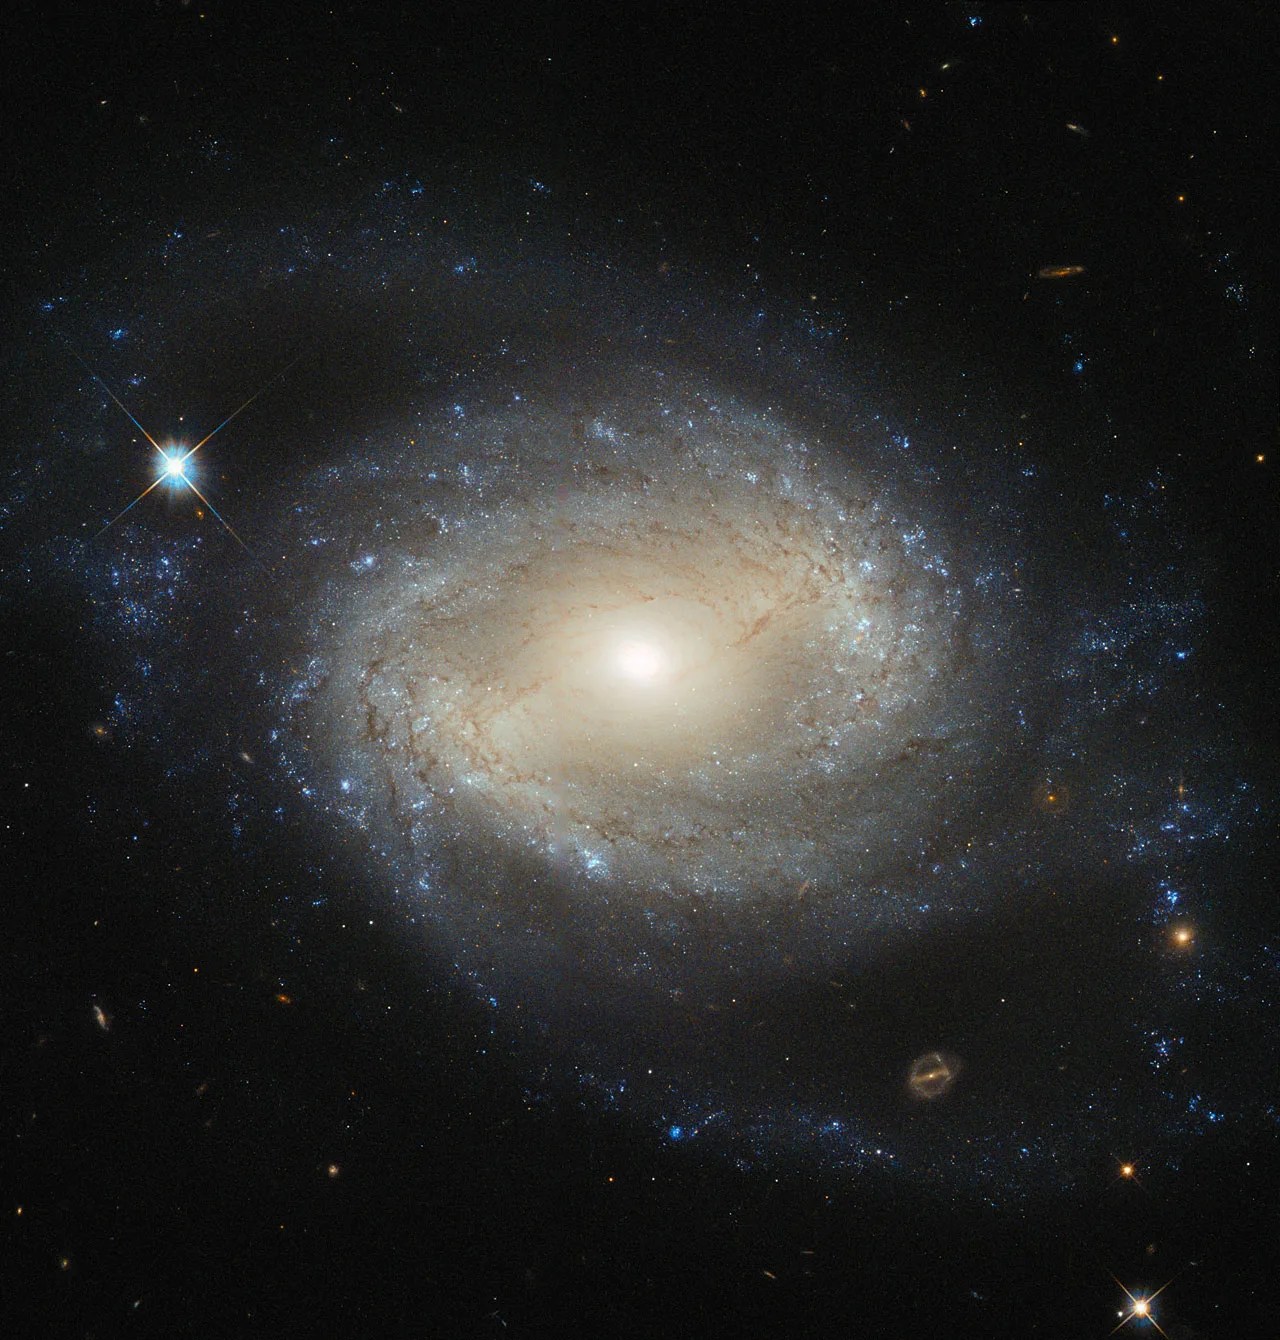 A beautiful example of a type of galaxy known as a barred spiral